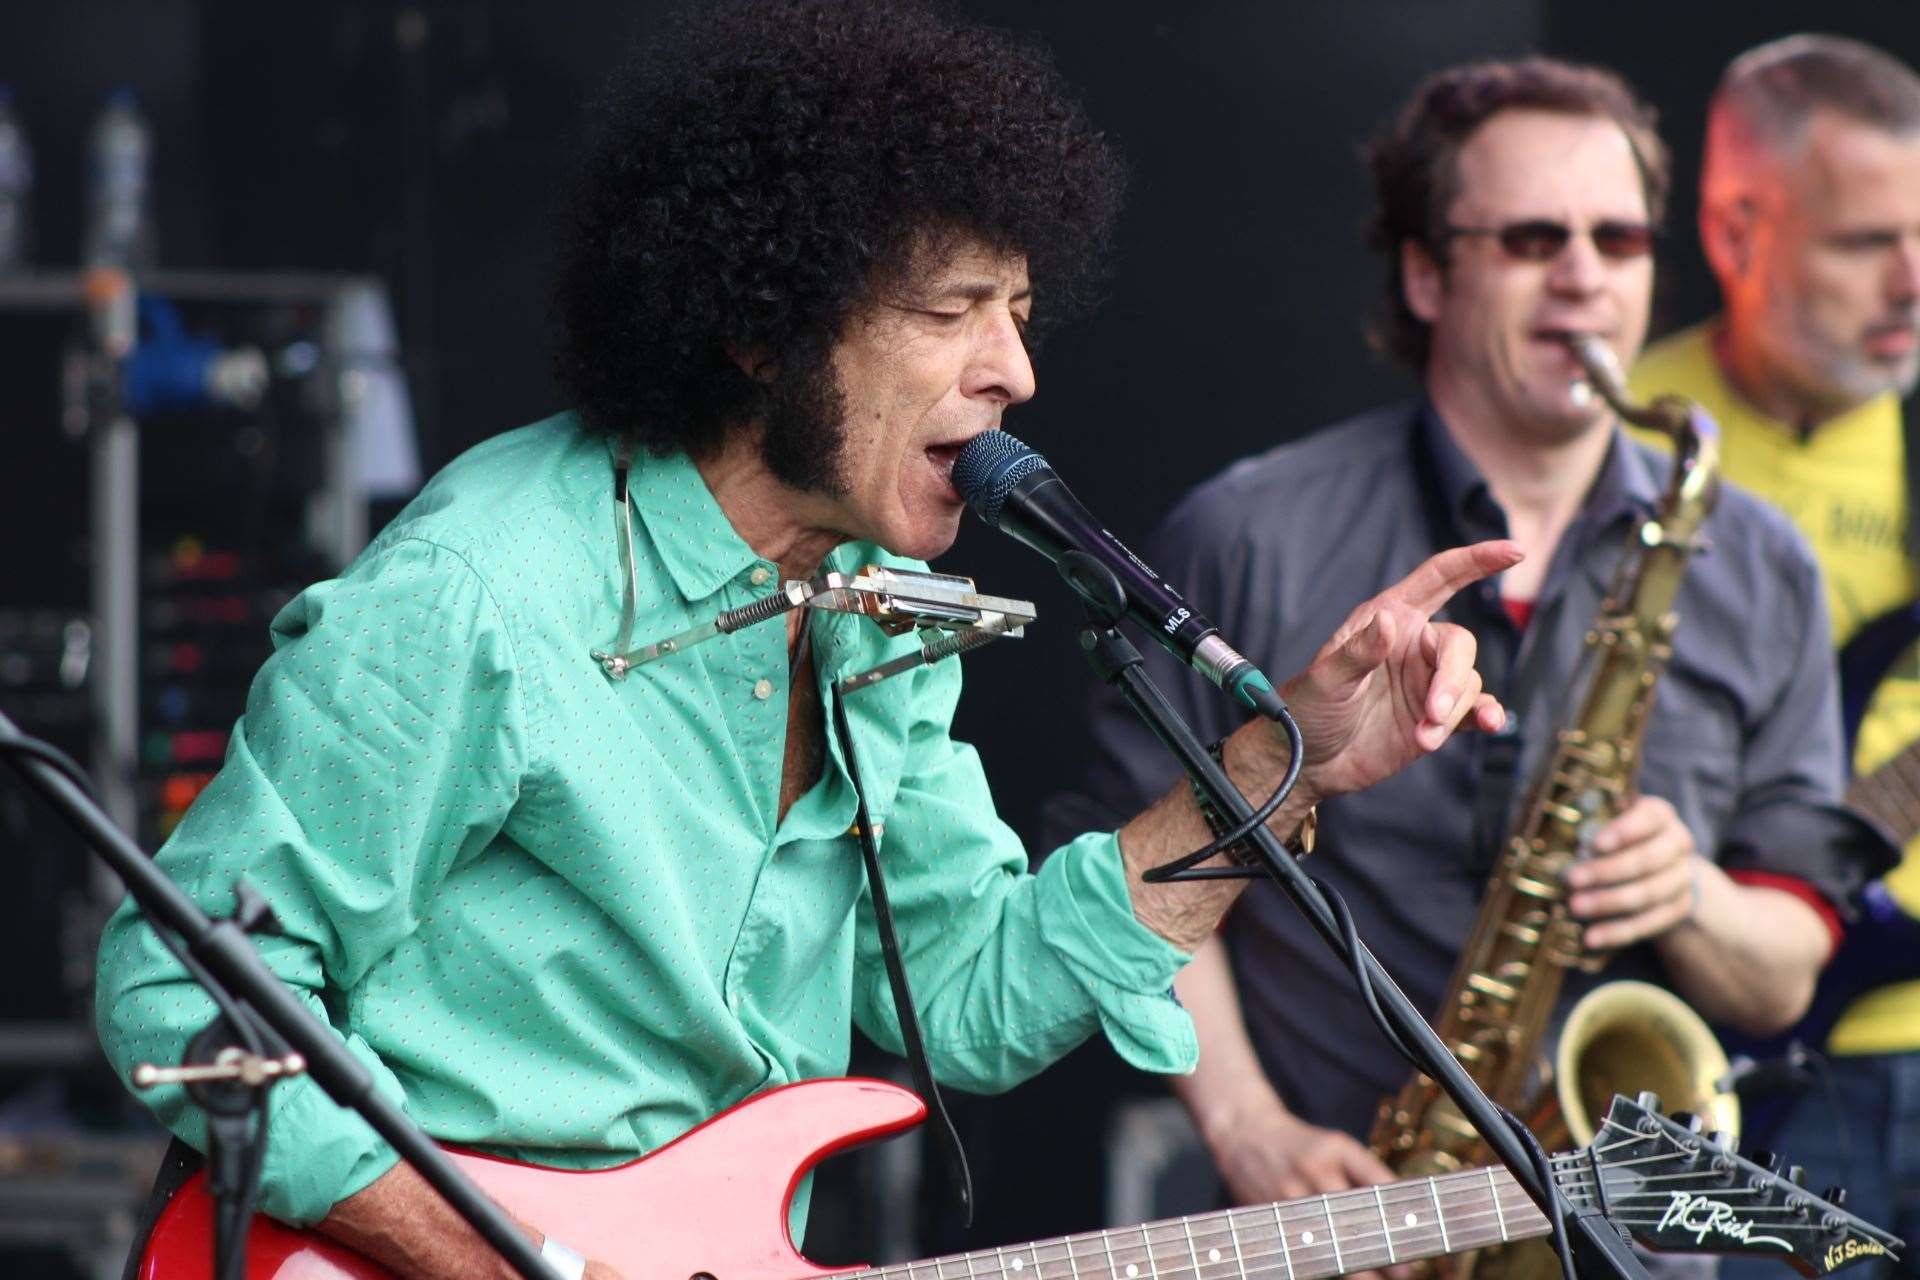 Ray Dorset of Mungo Jerry at A New Day Festival at Mount Ephraim Gardens, Hernhill, Faversham (14861486)